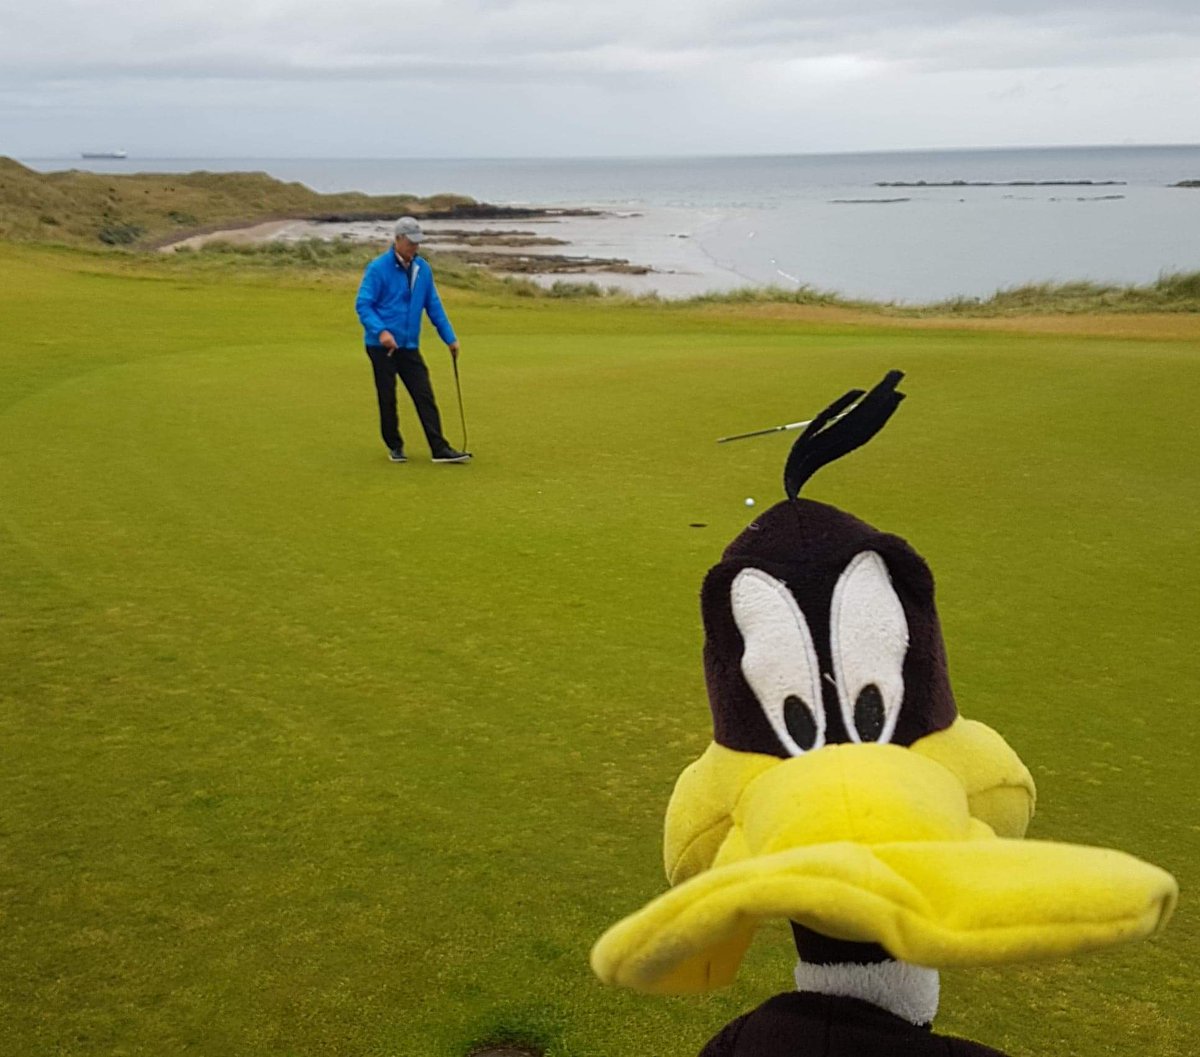 Surely he can't miss that,  hurry up, 25 meters to the half way house #g&t .
#cigar. Great day @therenaissanceclub with #DerekCrawford , John and Tom Eric my Viking friends from Norway. Ended the evening with a wine tasting #DucksInn  @DucksAberlady #ScotGolfCoast @goeastlothian